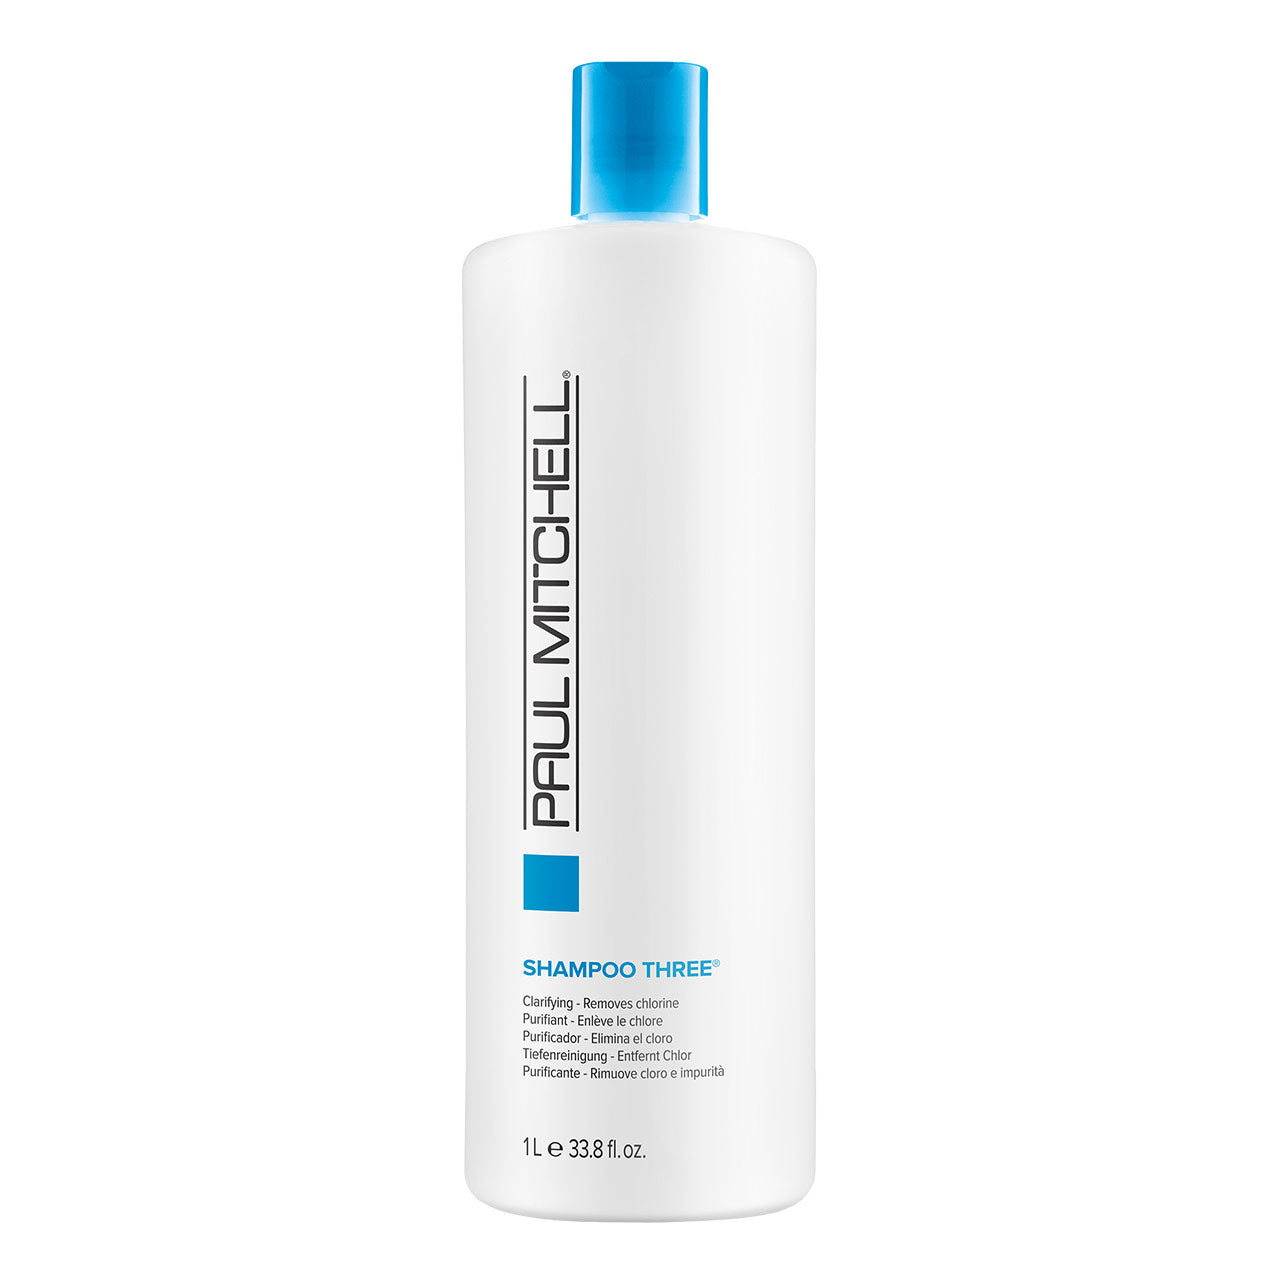 Clarifying Shampoo Three - 1L - by Paul Mitchell |ProCare Outlet|